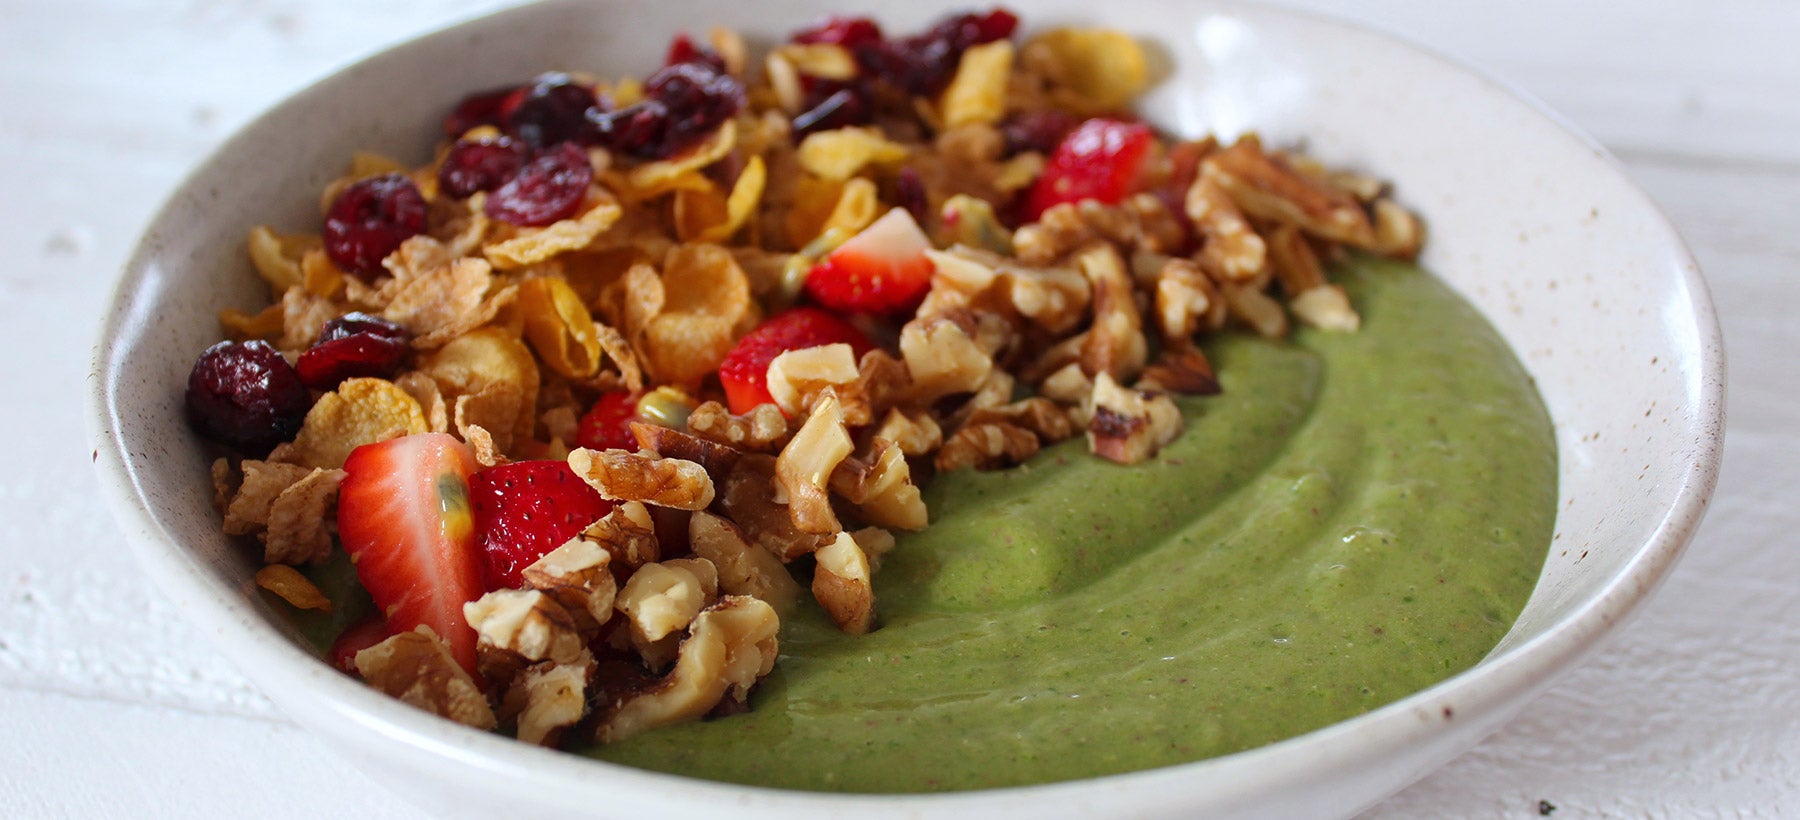 green-smoothie-bowl-decorated-with-fruit-and-nuts